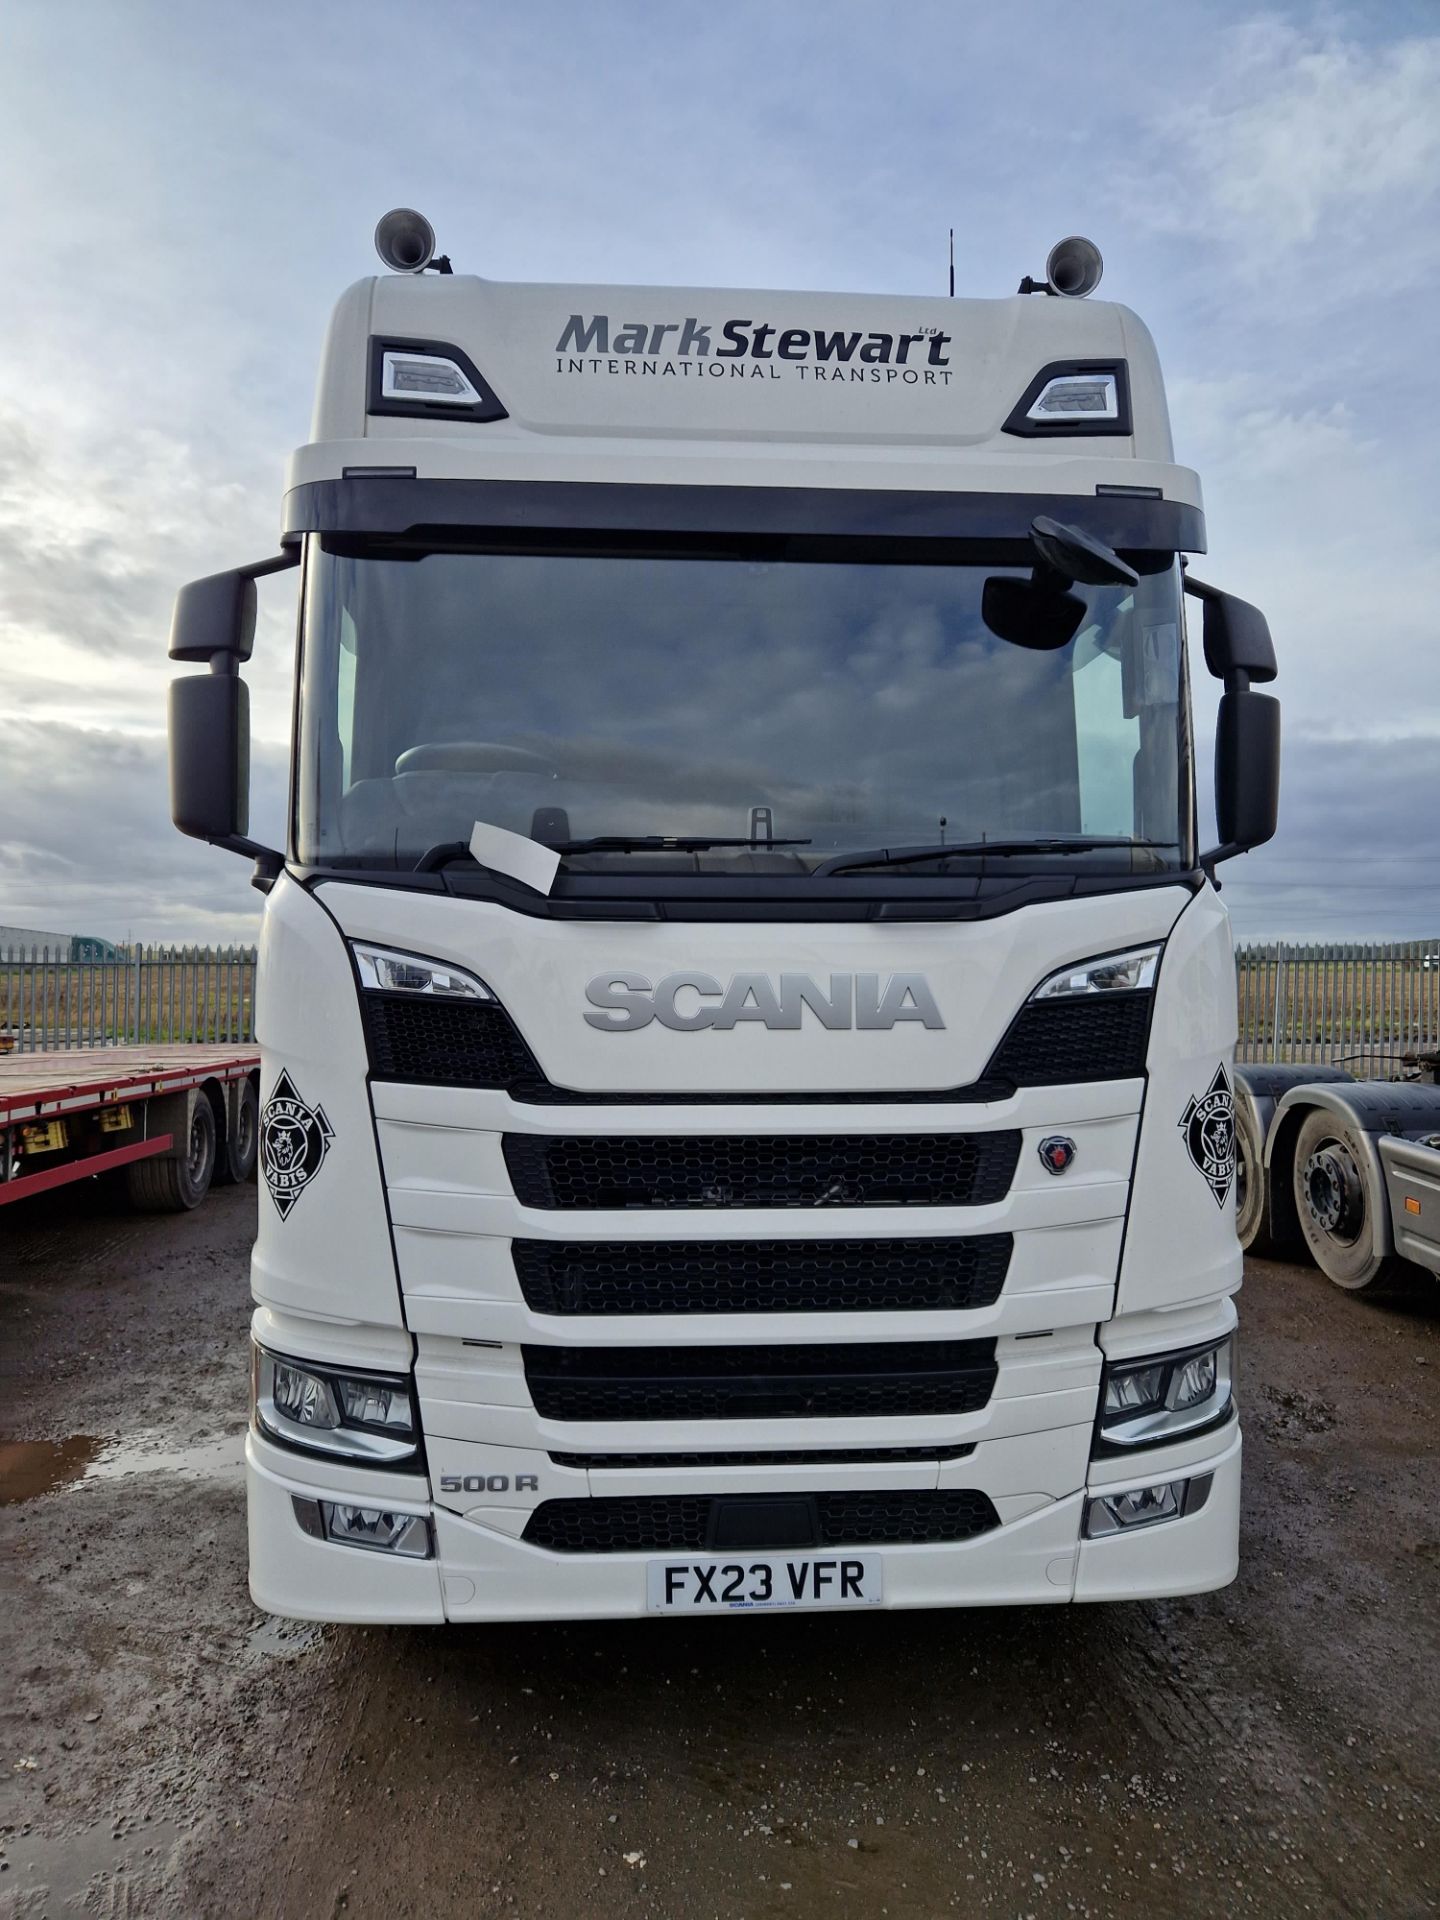 Scania R500 Next Generation 44T 6x2 Tractor Unit with Fridge Freezer, Dura Bright Wheels, Air - Image 6 of 9